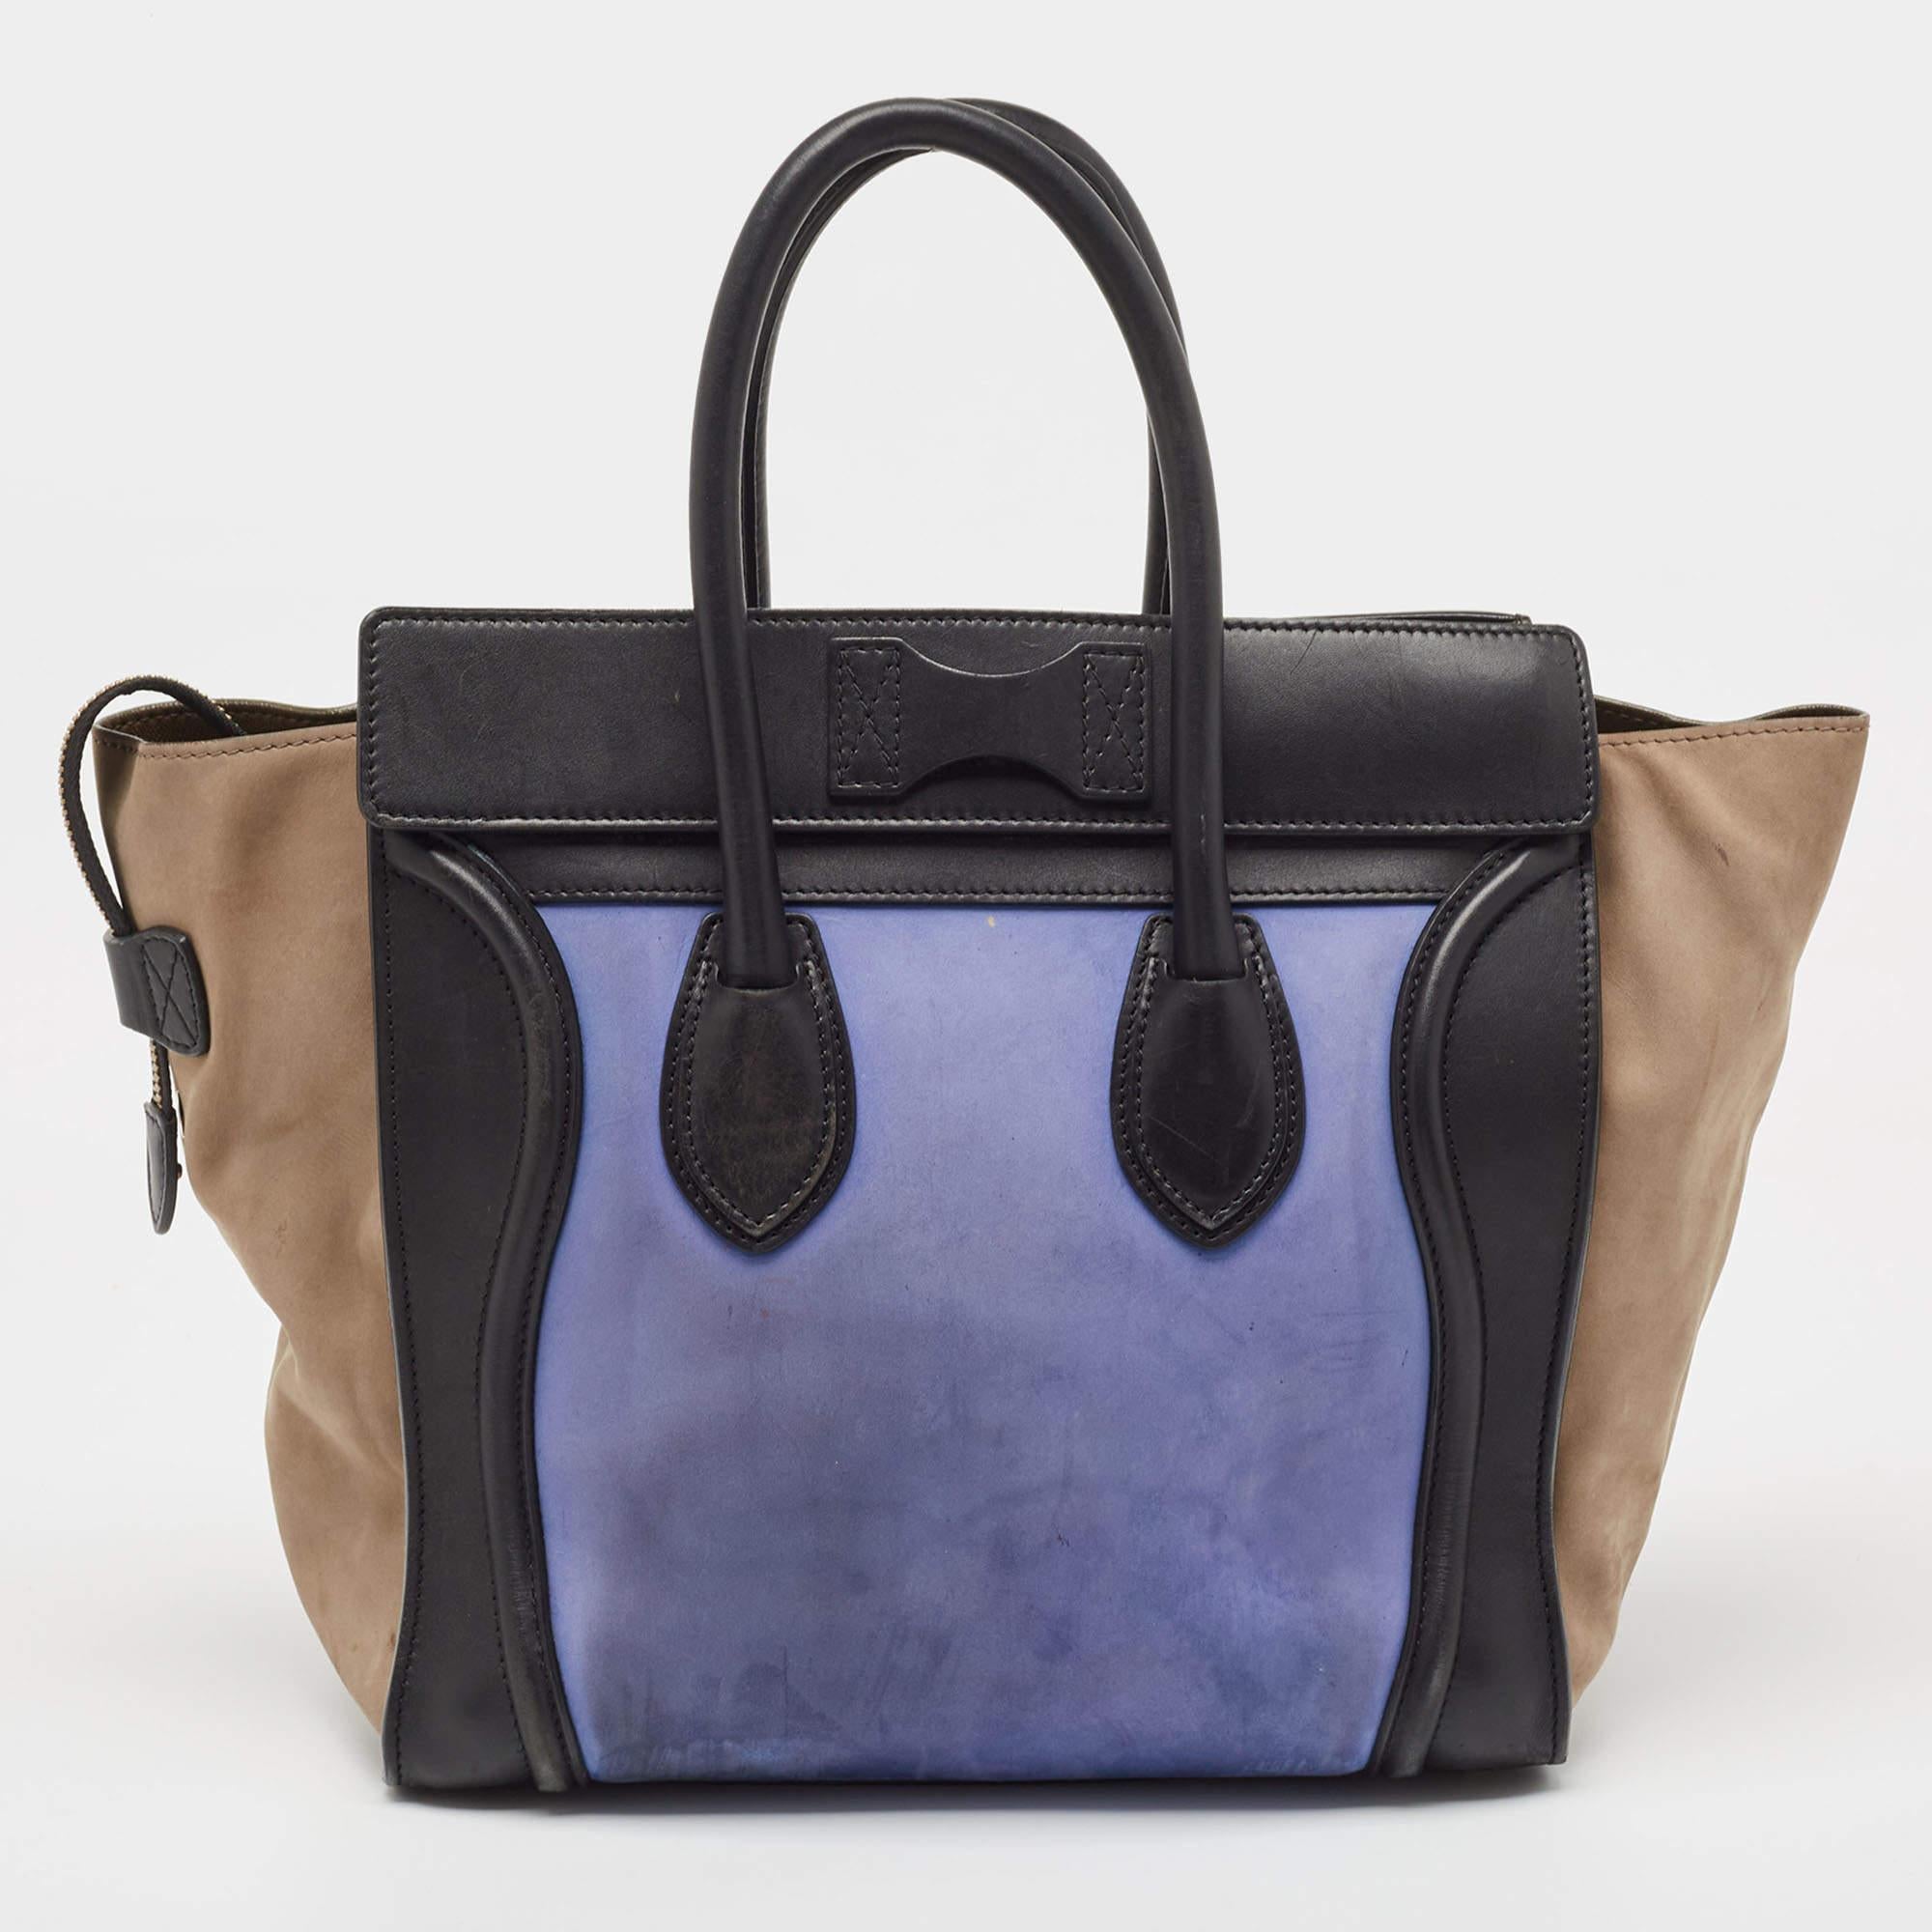 The usage of tri-color leather on the exterior gives this Celine tote a high appeal. An eye-catching accessory, the bag features a front zipper pocket, dual handles at the top, and gold-tone hardware. The leather-lined interior is equipped to store